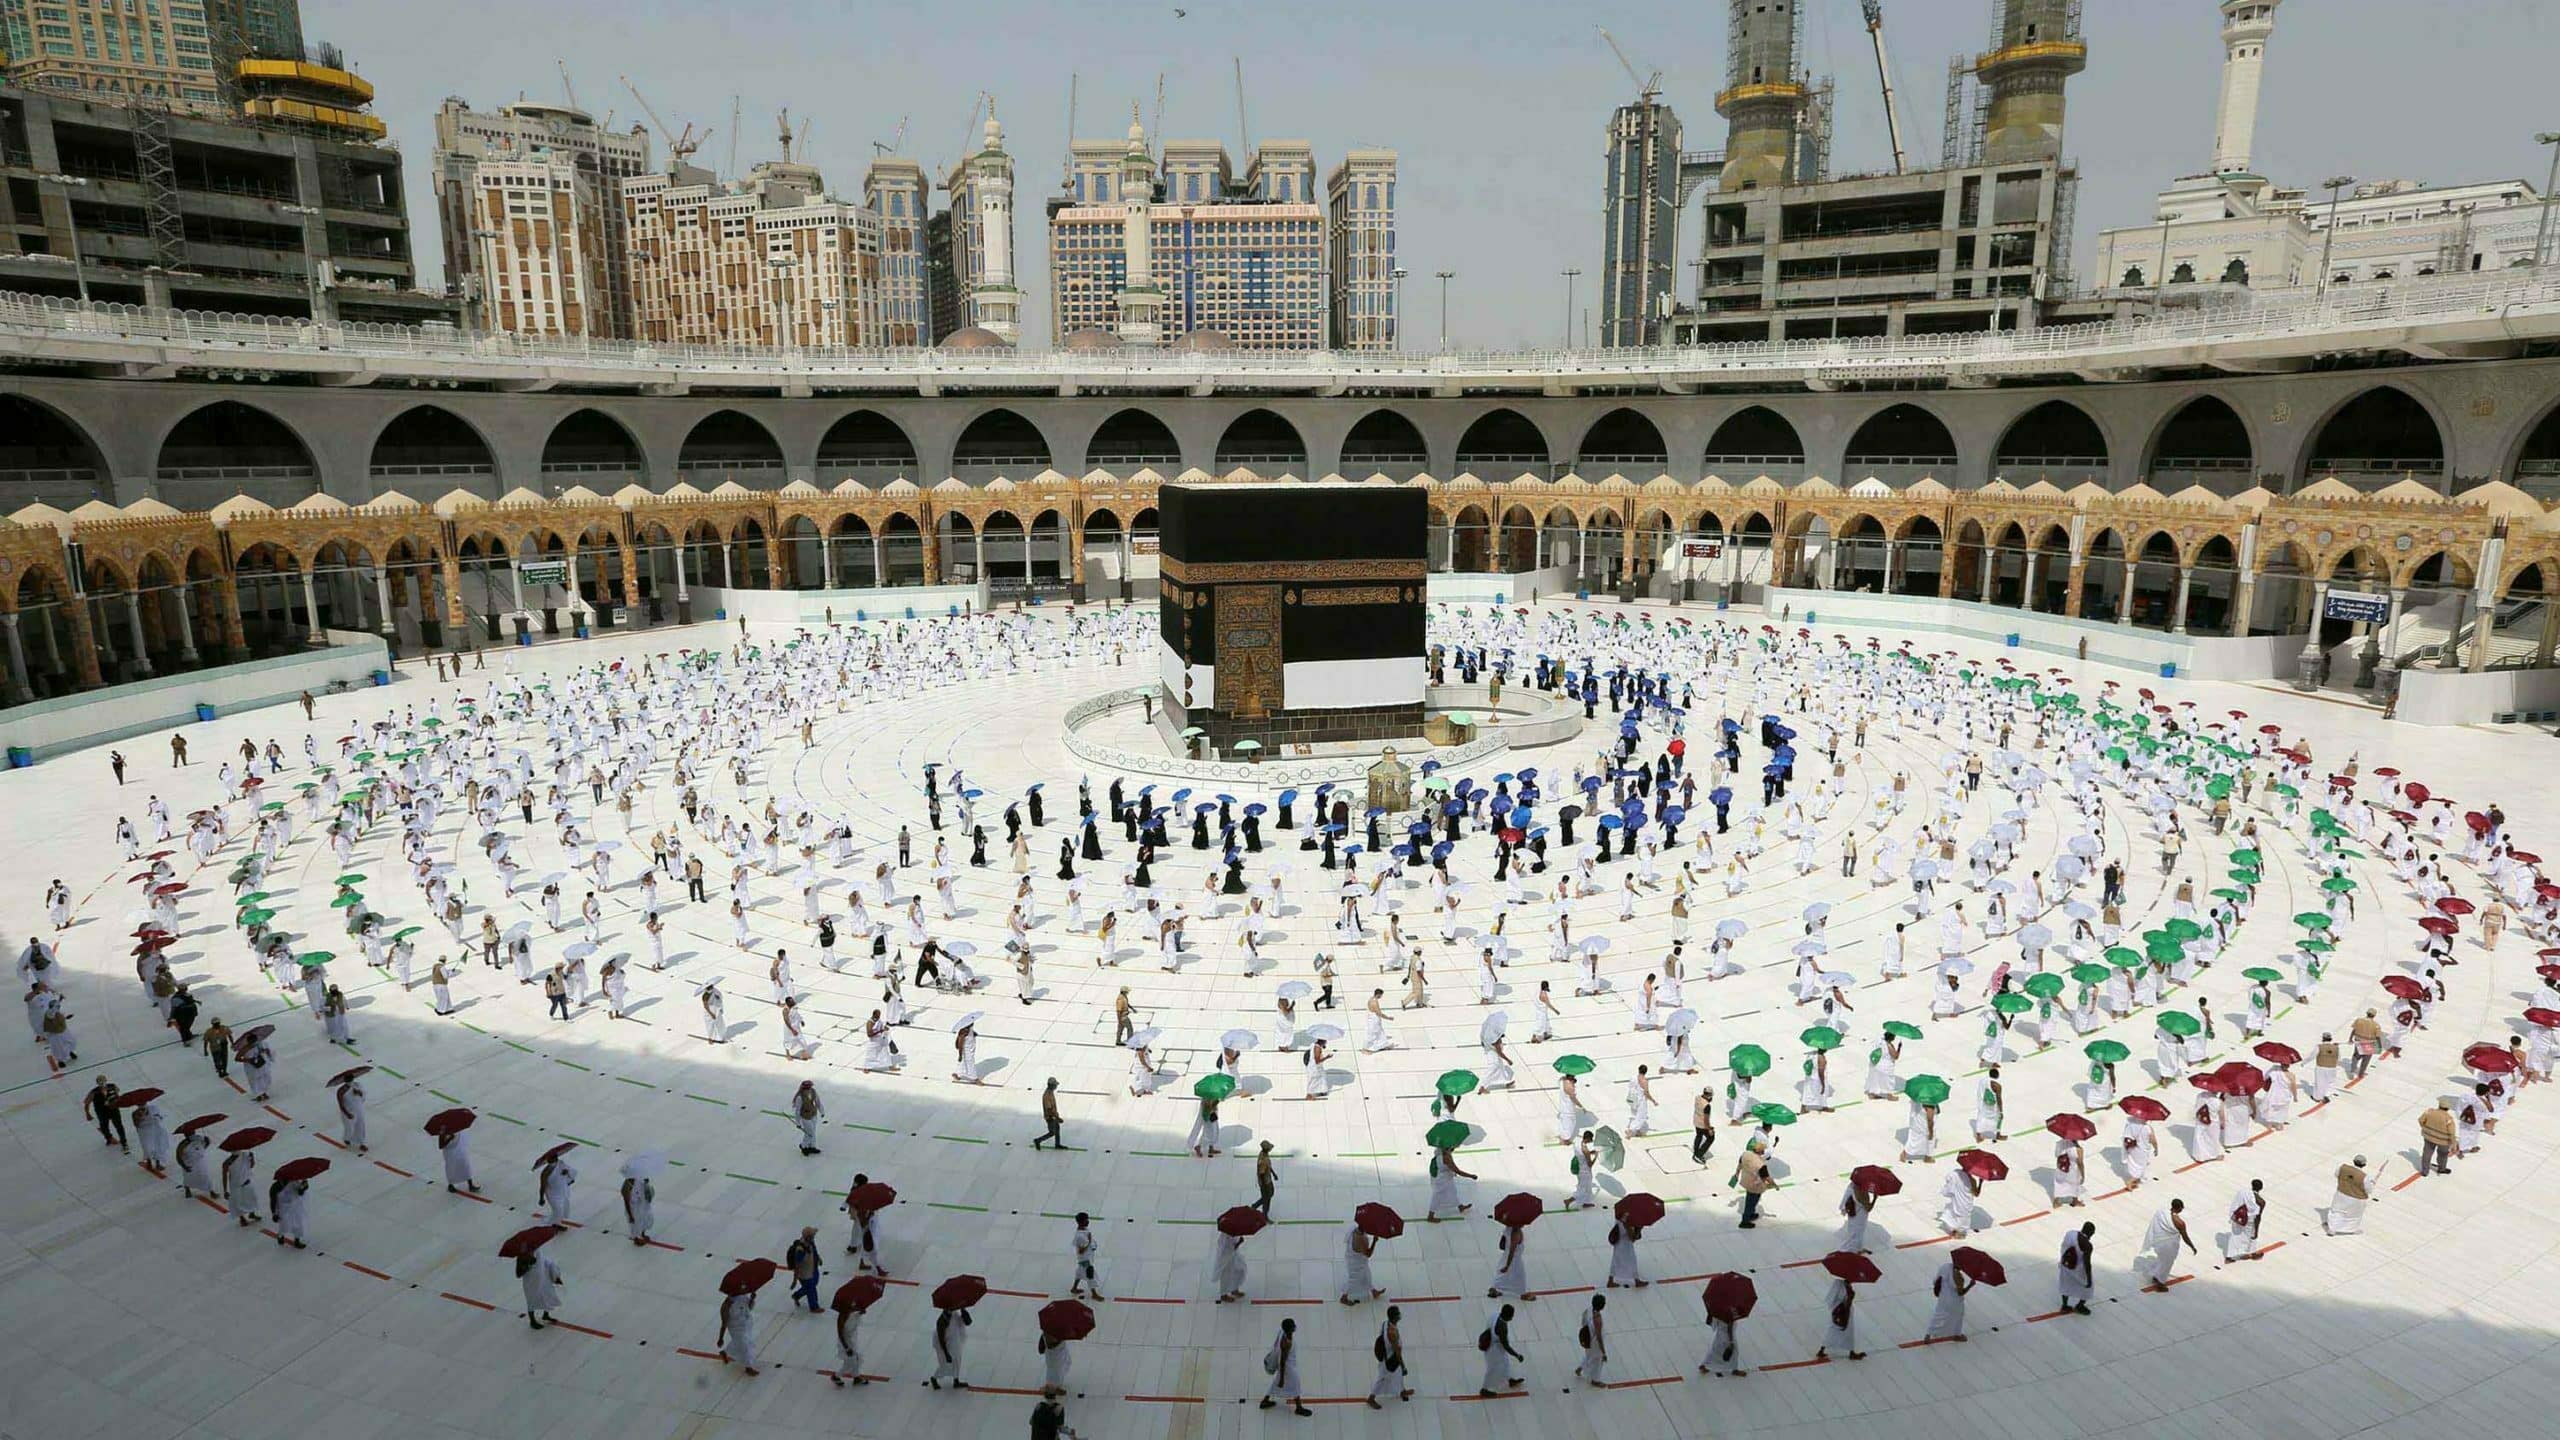 Overseas pilgrims to attend Hajj this year - report